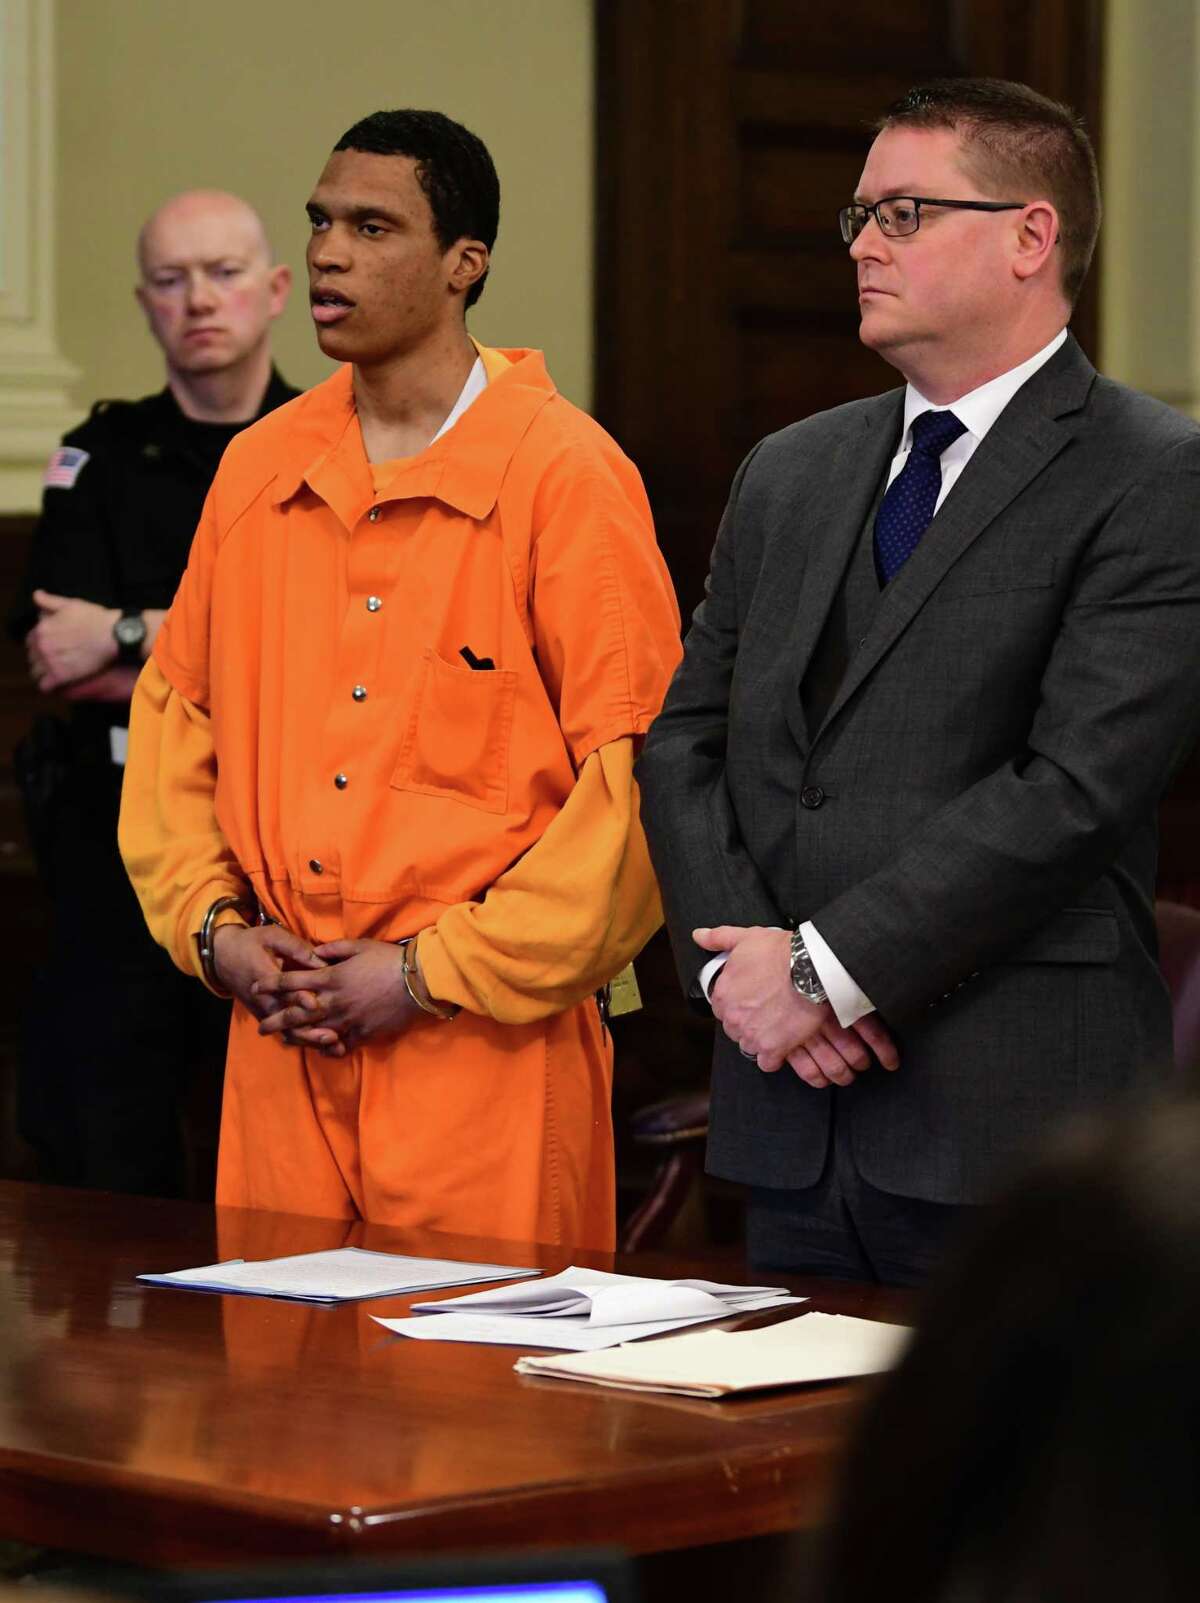 Justin Mann answers questions from Judge Debra Young as he pleads guilty to four counts of second degree murder for the December 2017 quadruple homicide in Lansingburgh in Rensselaer County Court on Friday April 5, 2019 in Troy, N.Y. Defense attorney Joseph Ahearn stands next to him. (Lori Van Buren/Times Union)